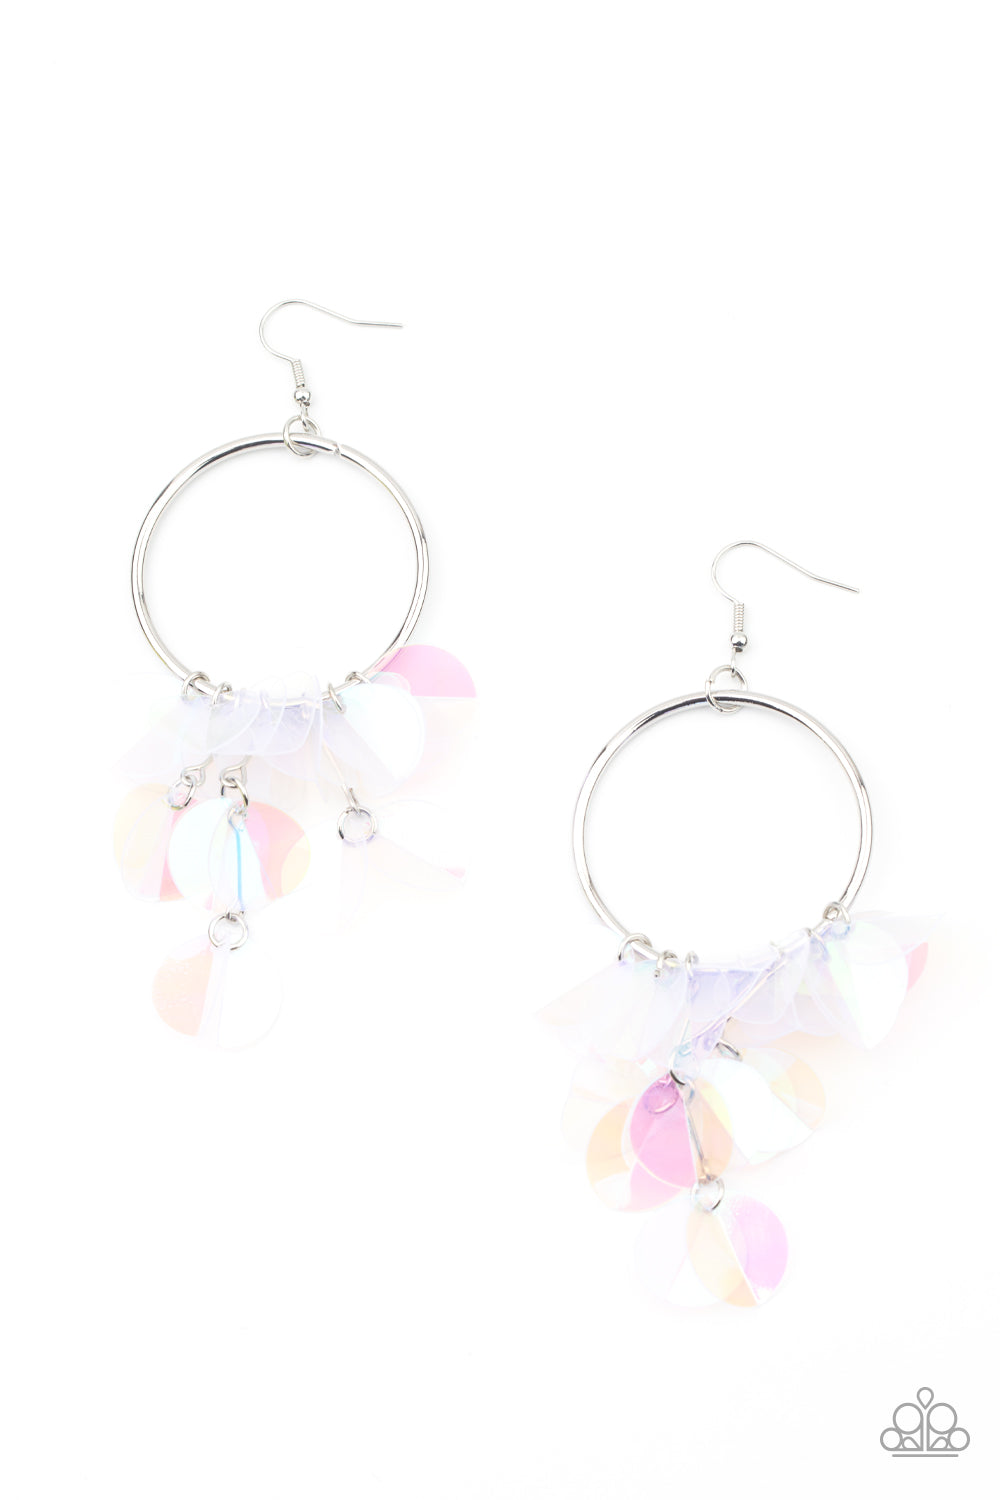 Holographic Hype Multi Earrings May Life of the Party Exclusive - Princess Glam Shop